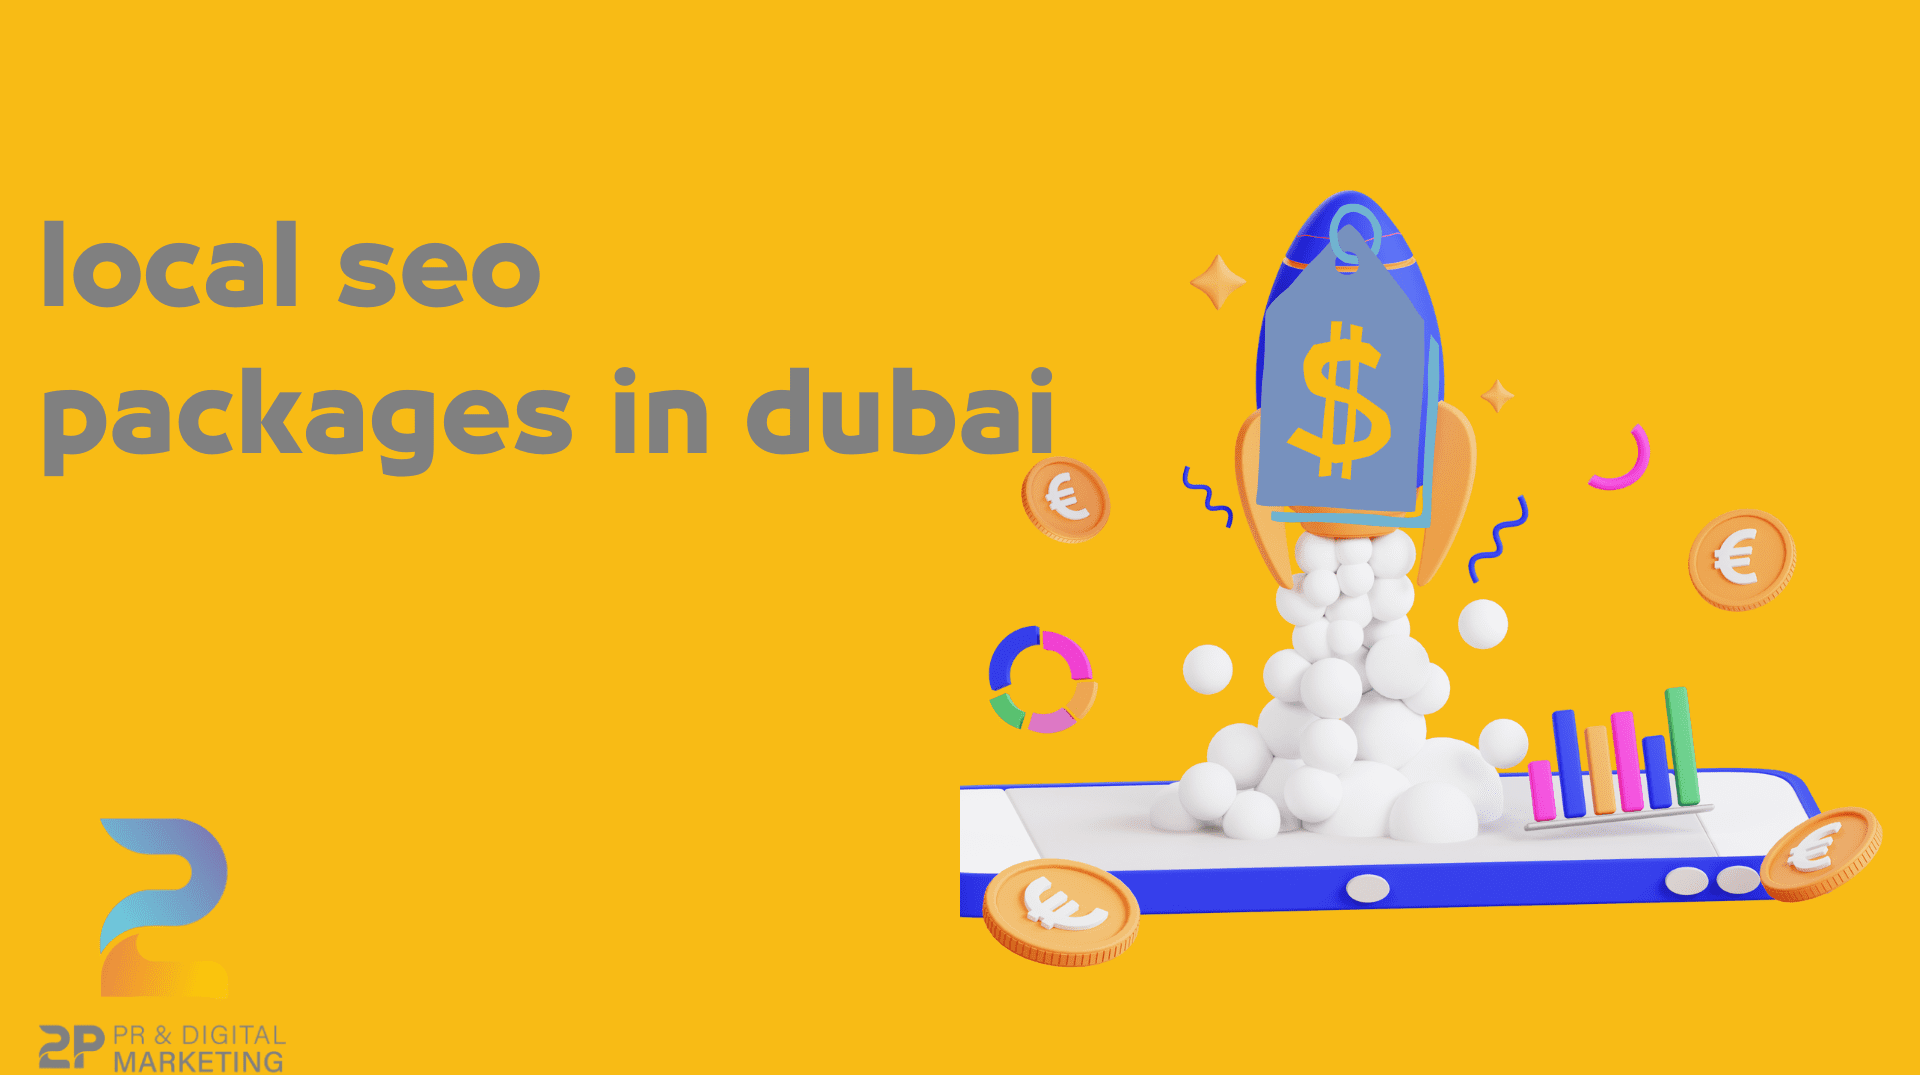 local seo packages in dubai: What You Need to Know